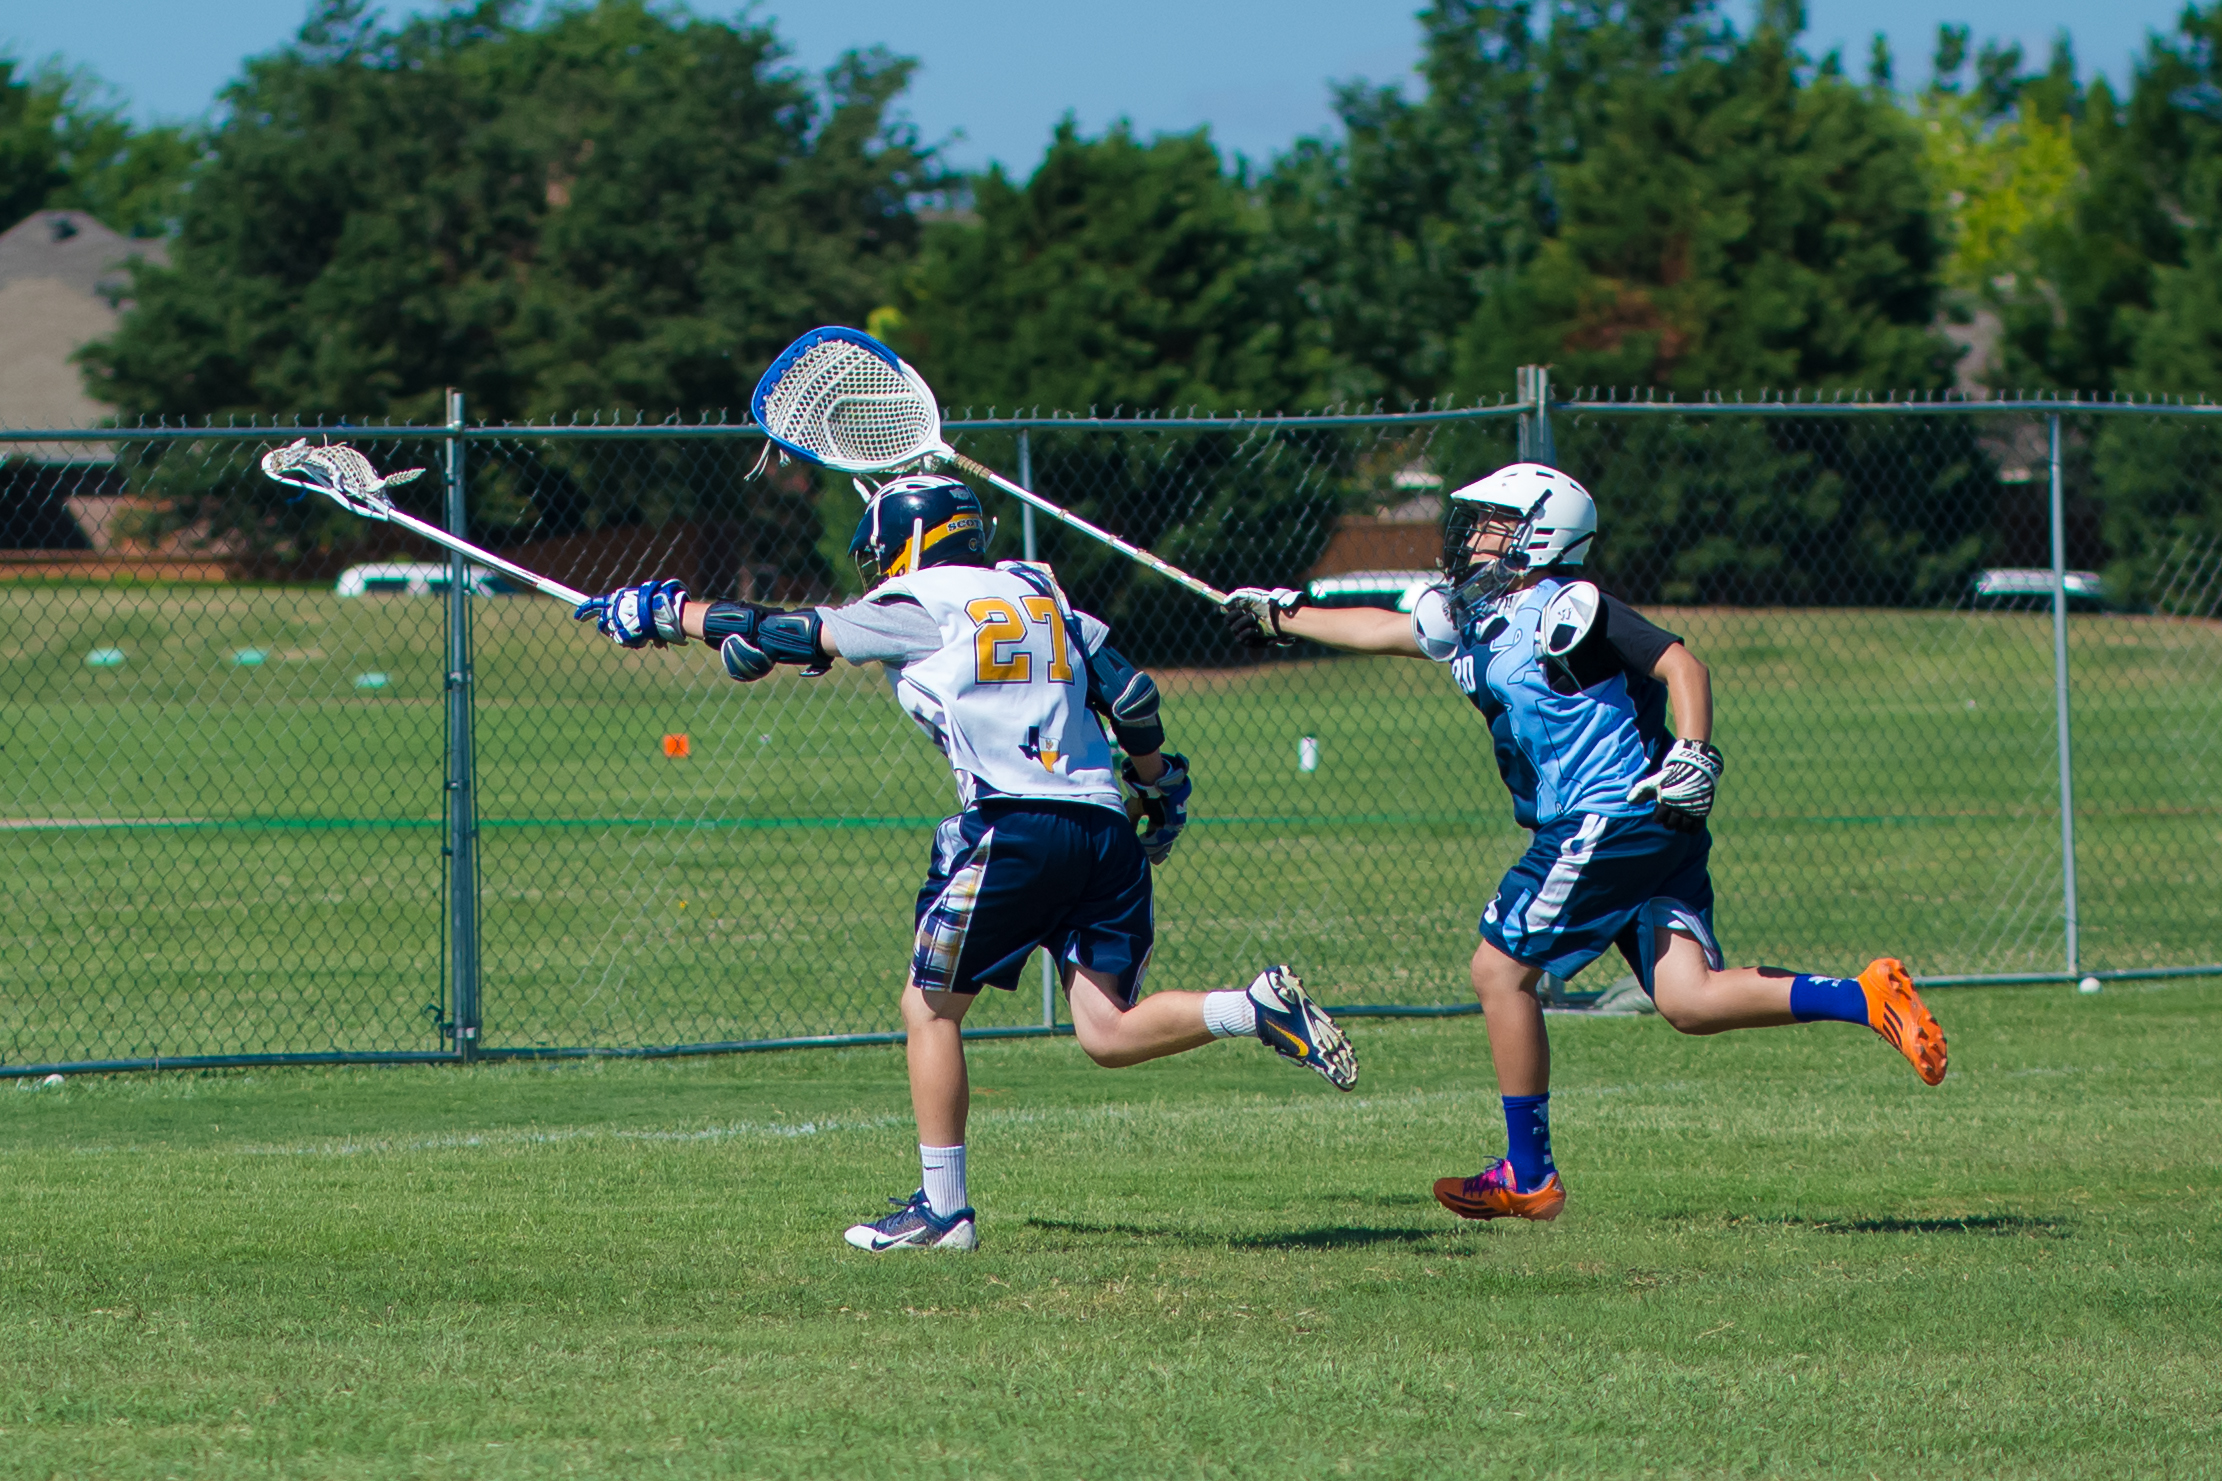 lacrosse players in action on the field playing a game